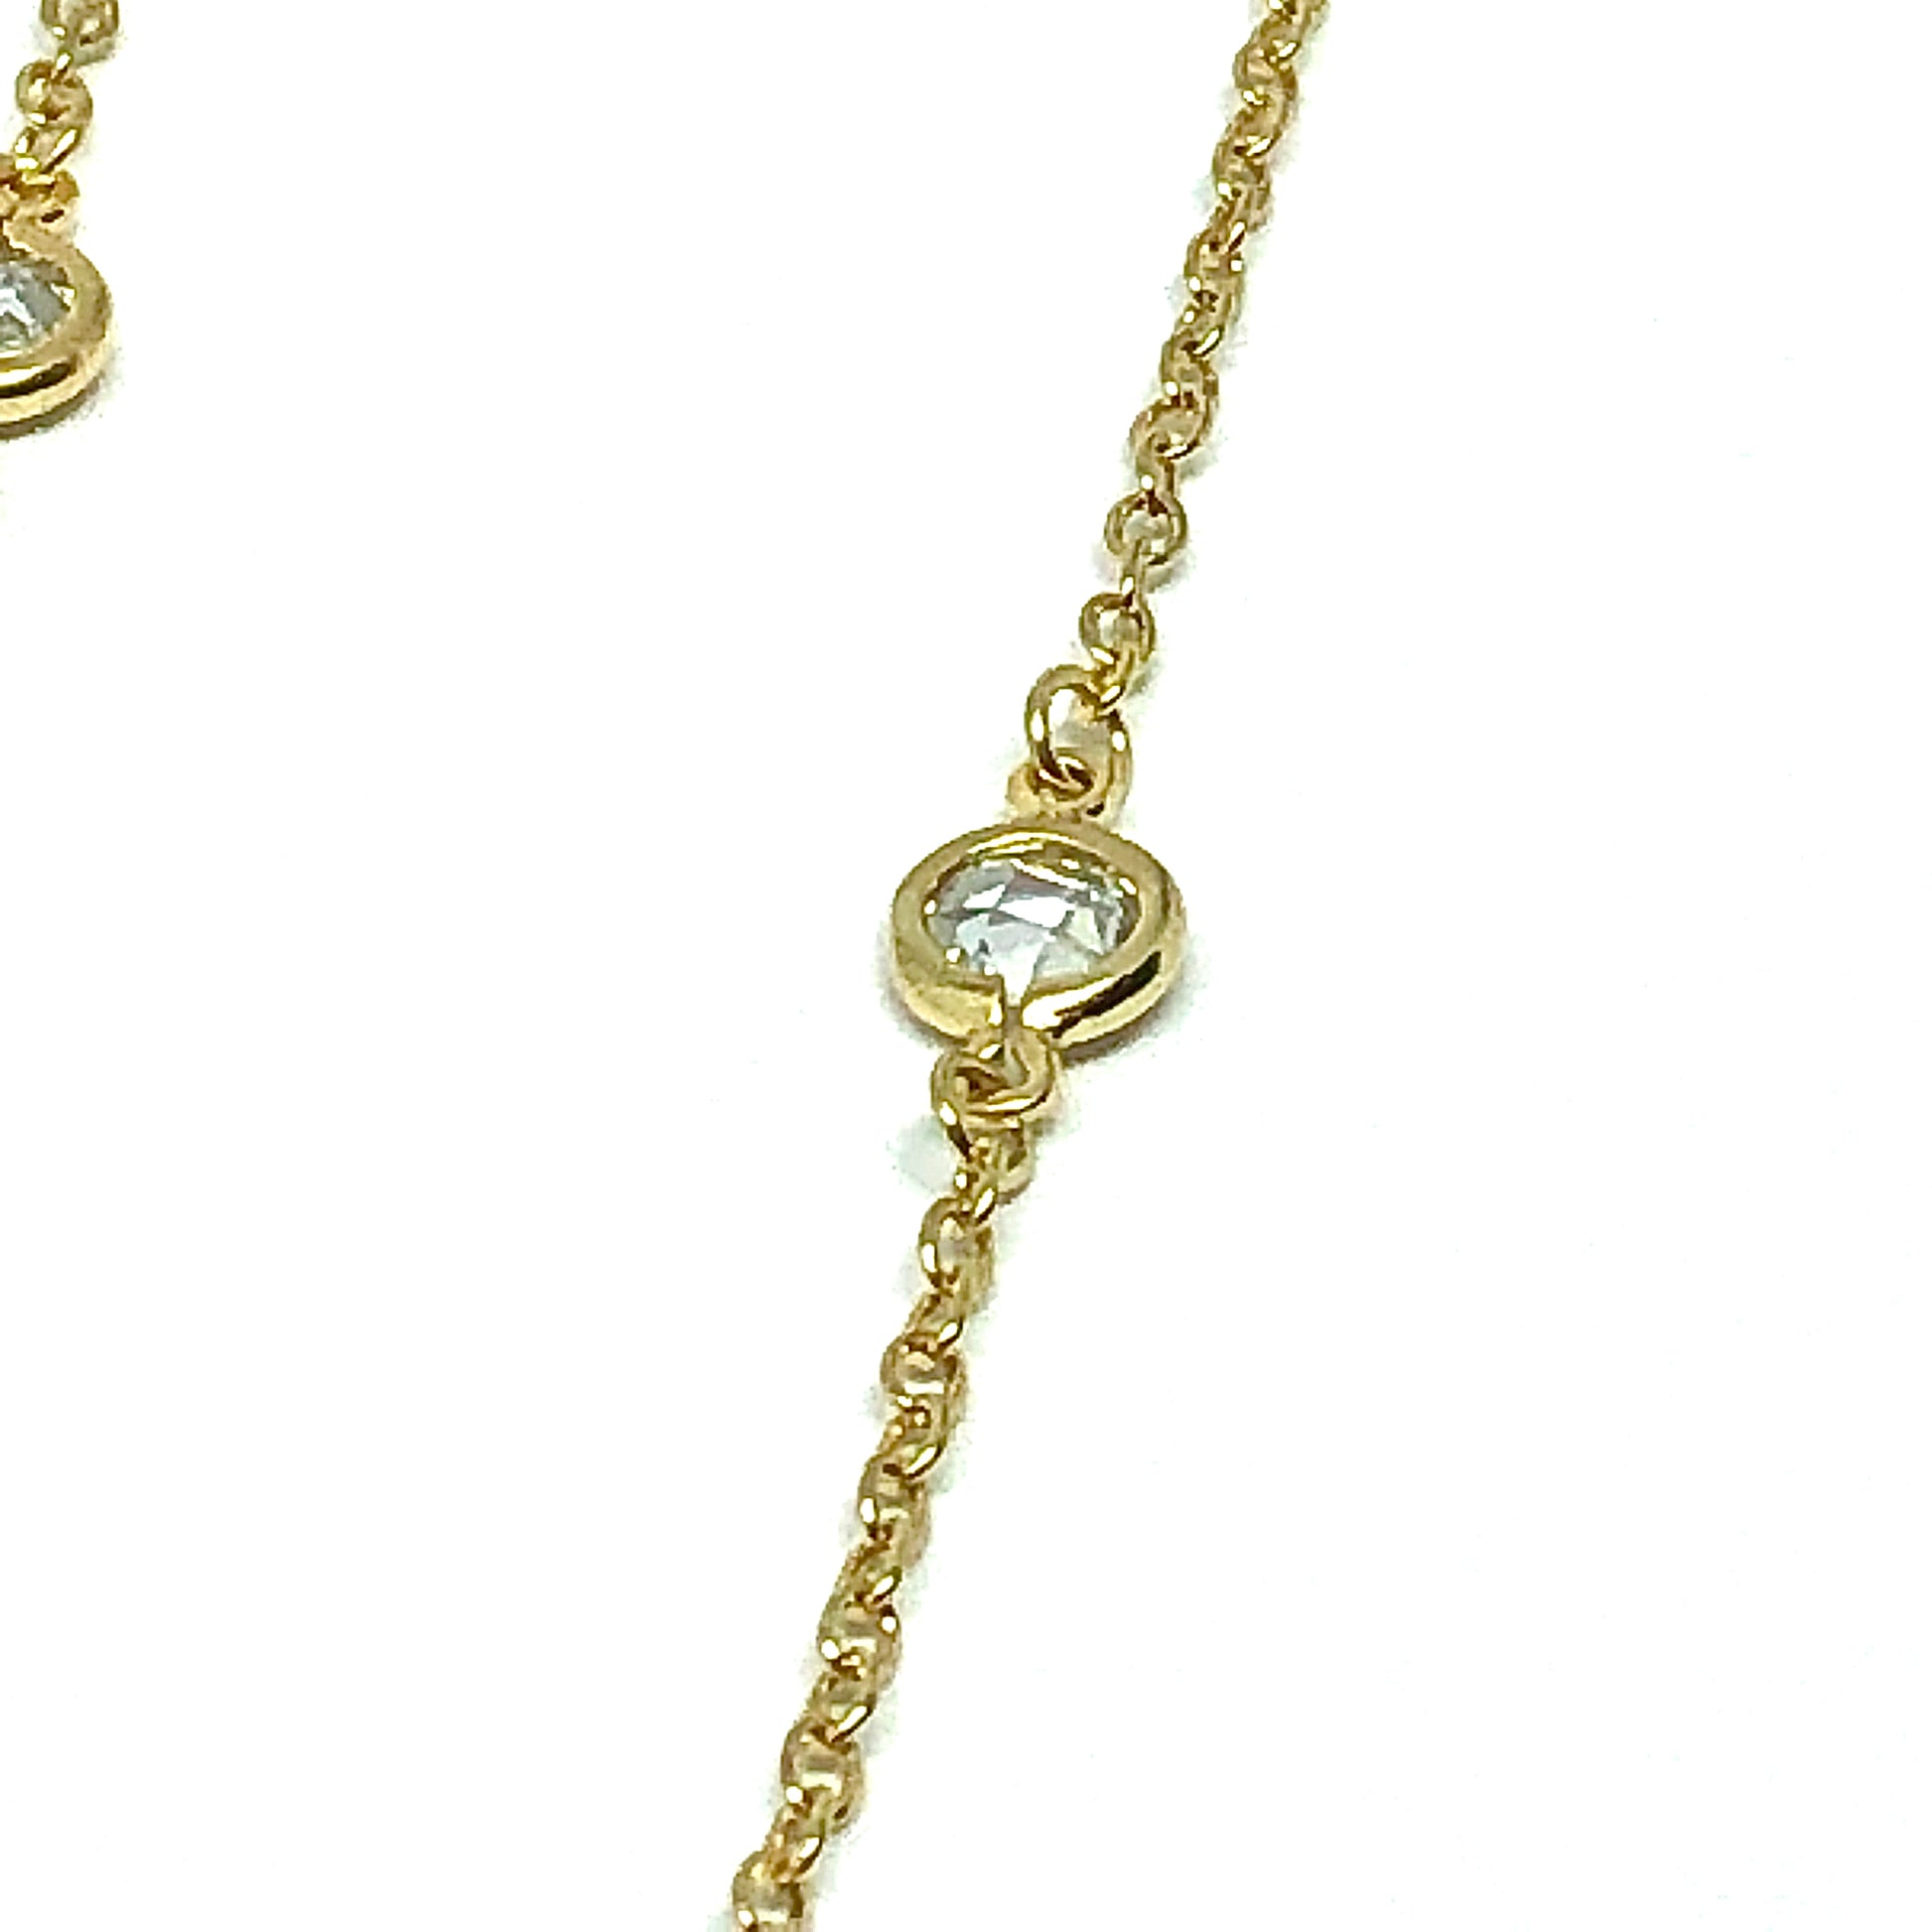 925 Silver Gold Opera Length Crystal Station Necklace 36in